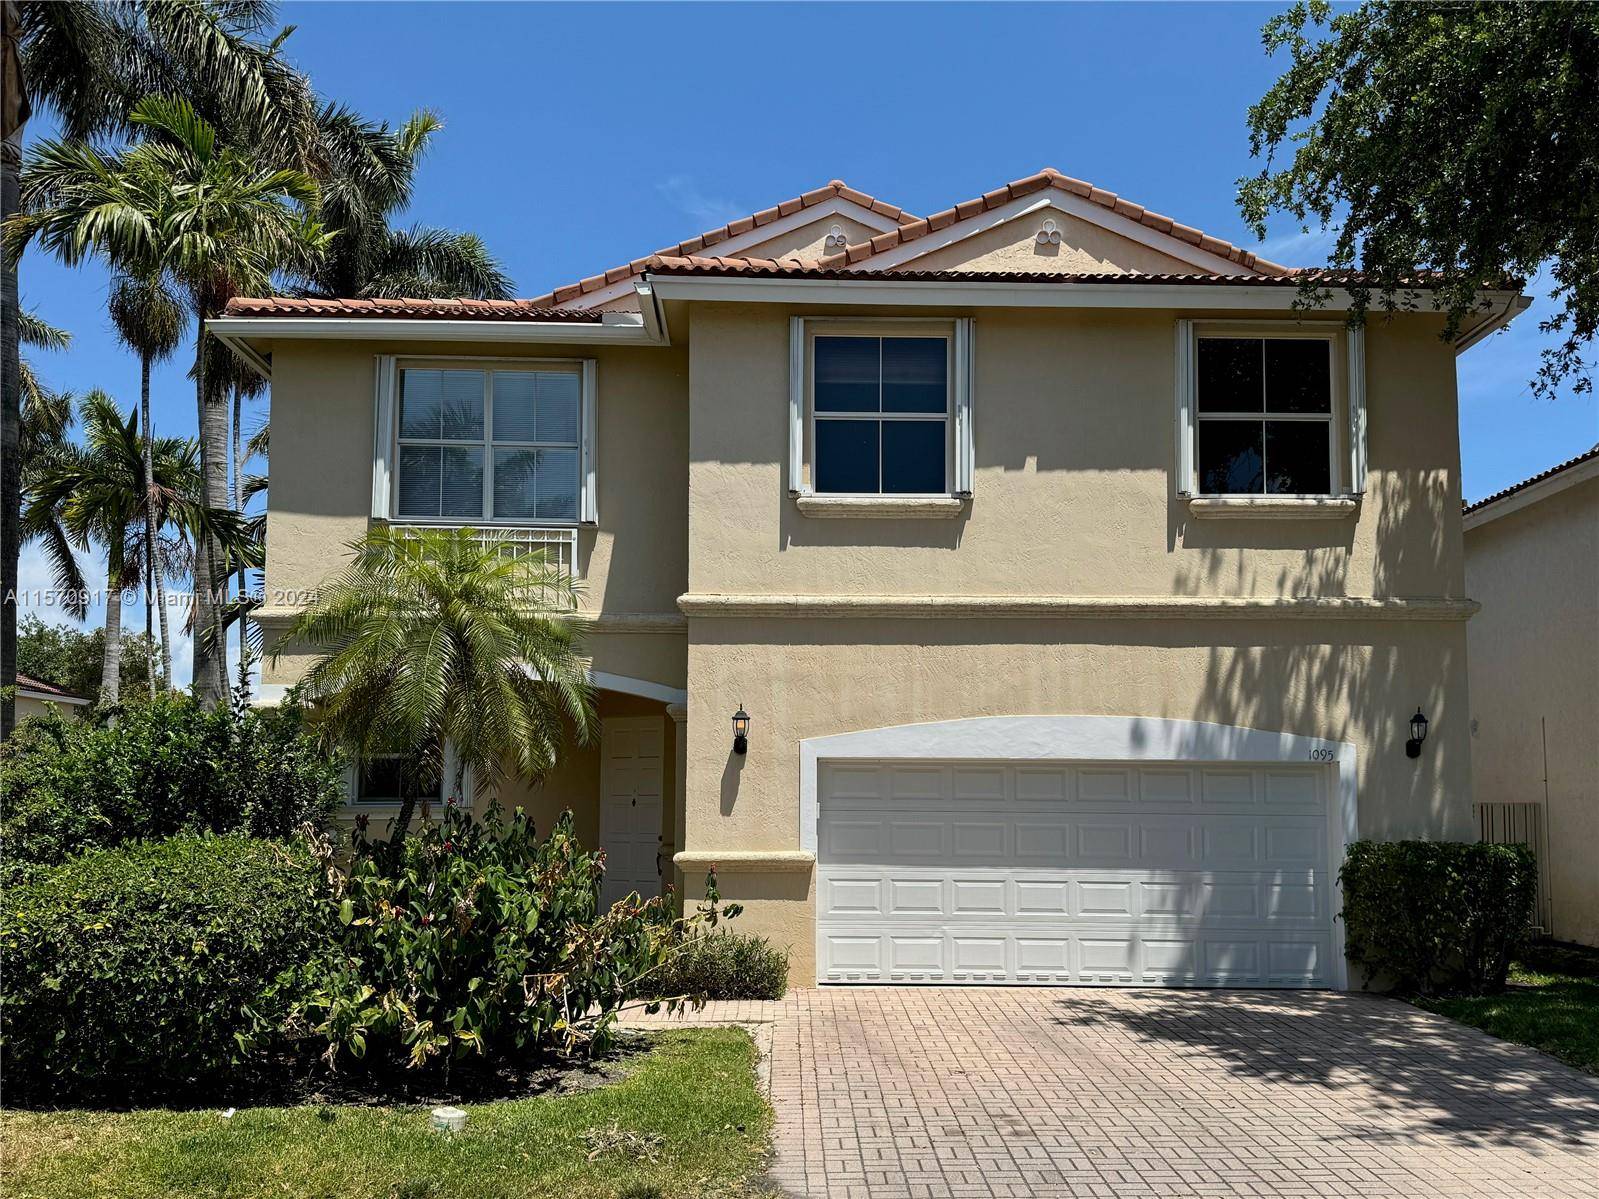 Looking for a large home in a gated community close to the beach ?